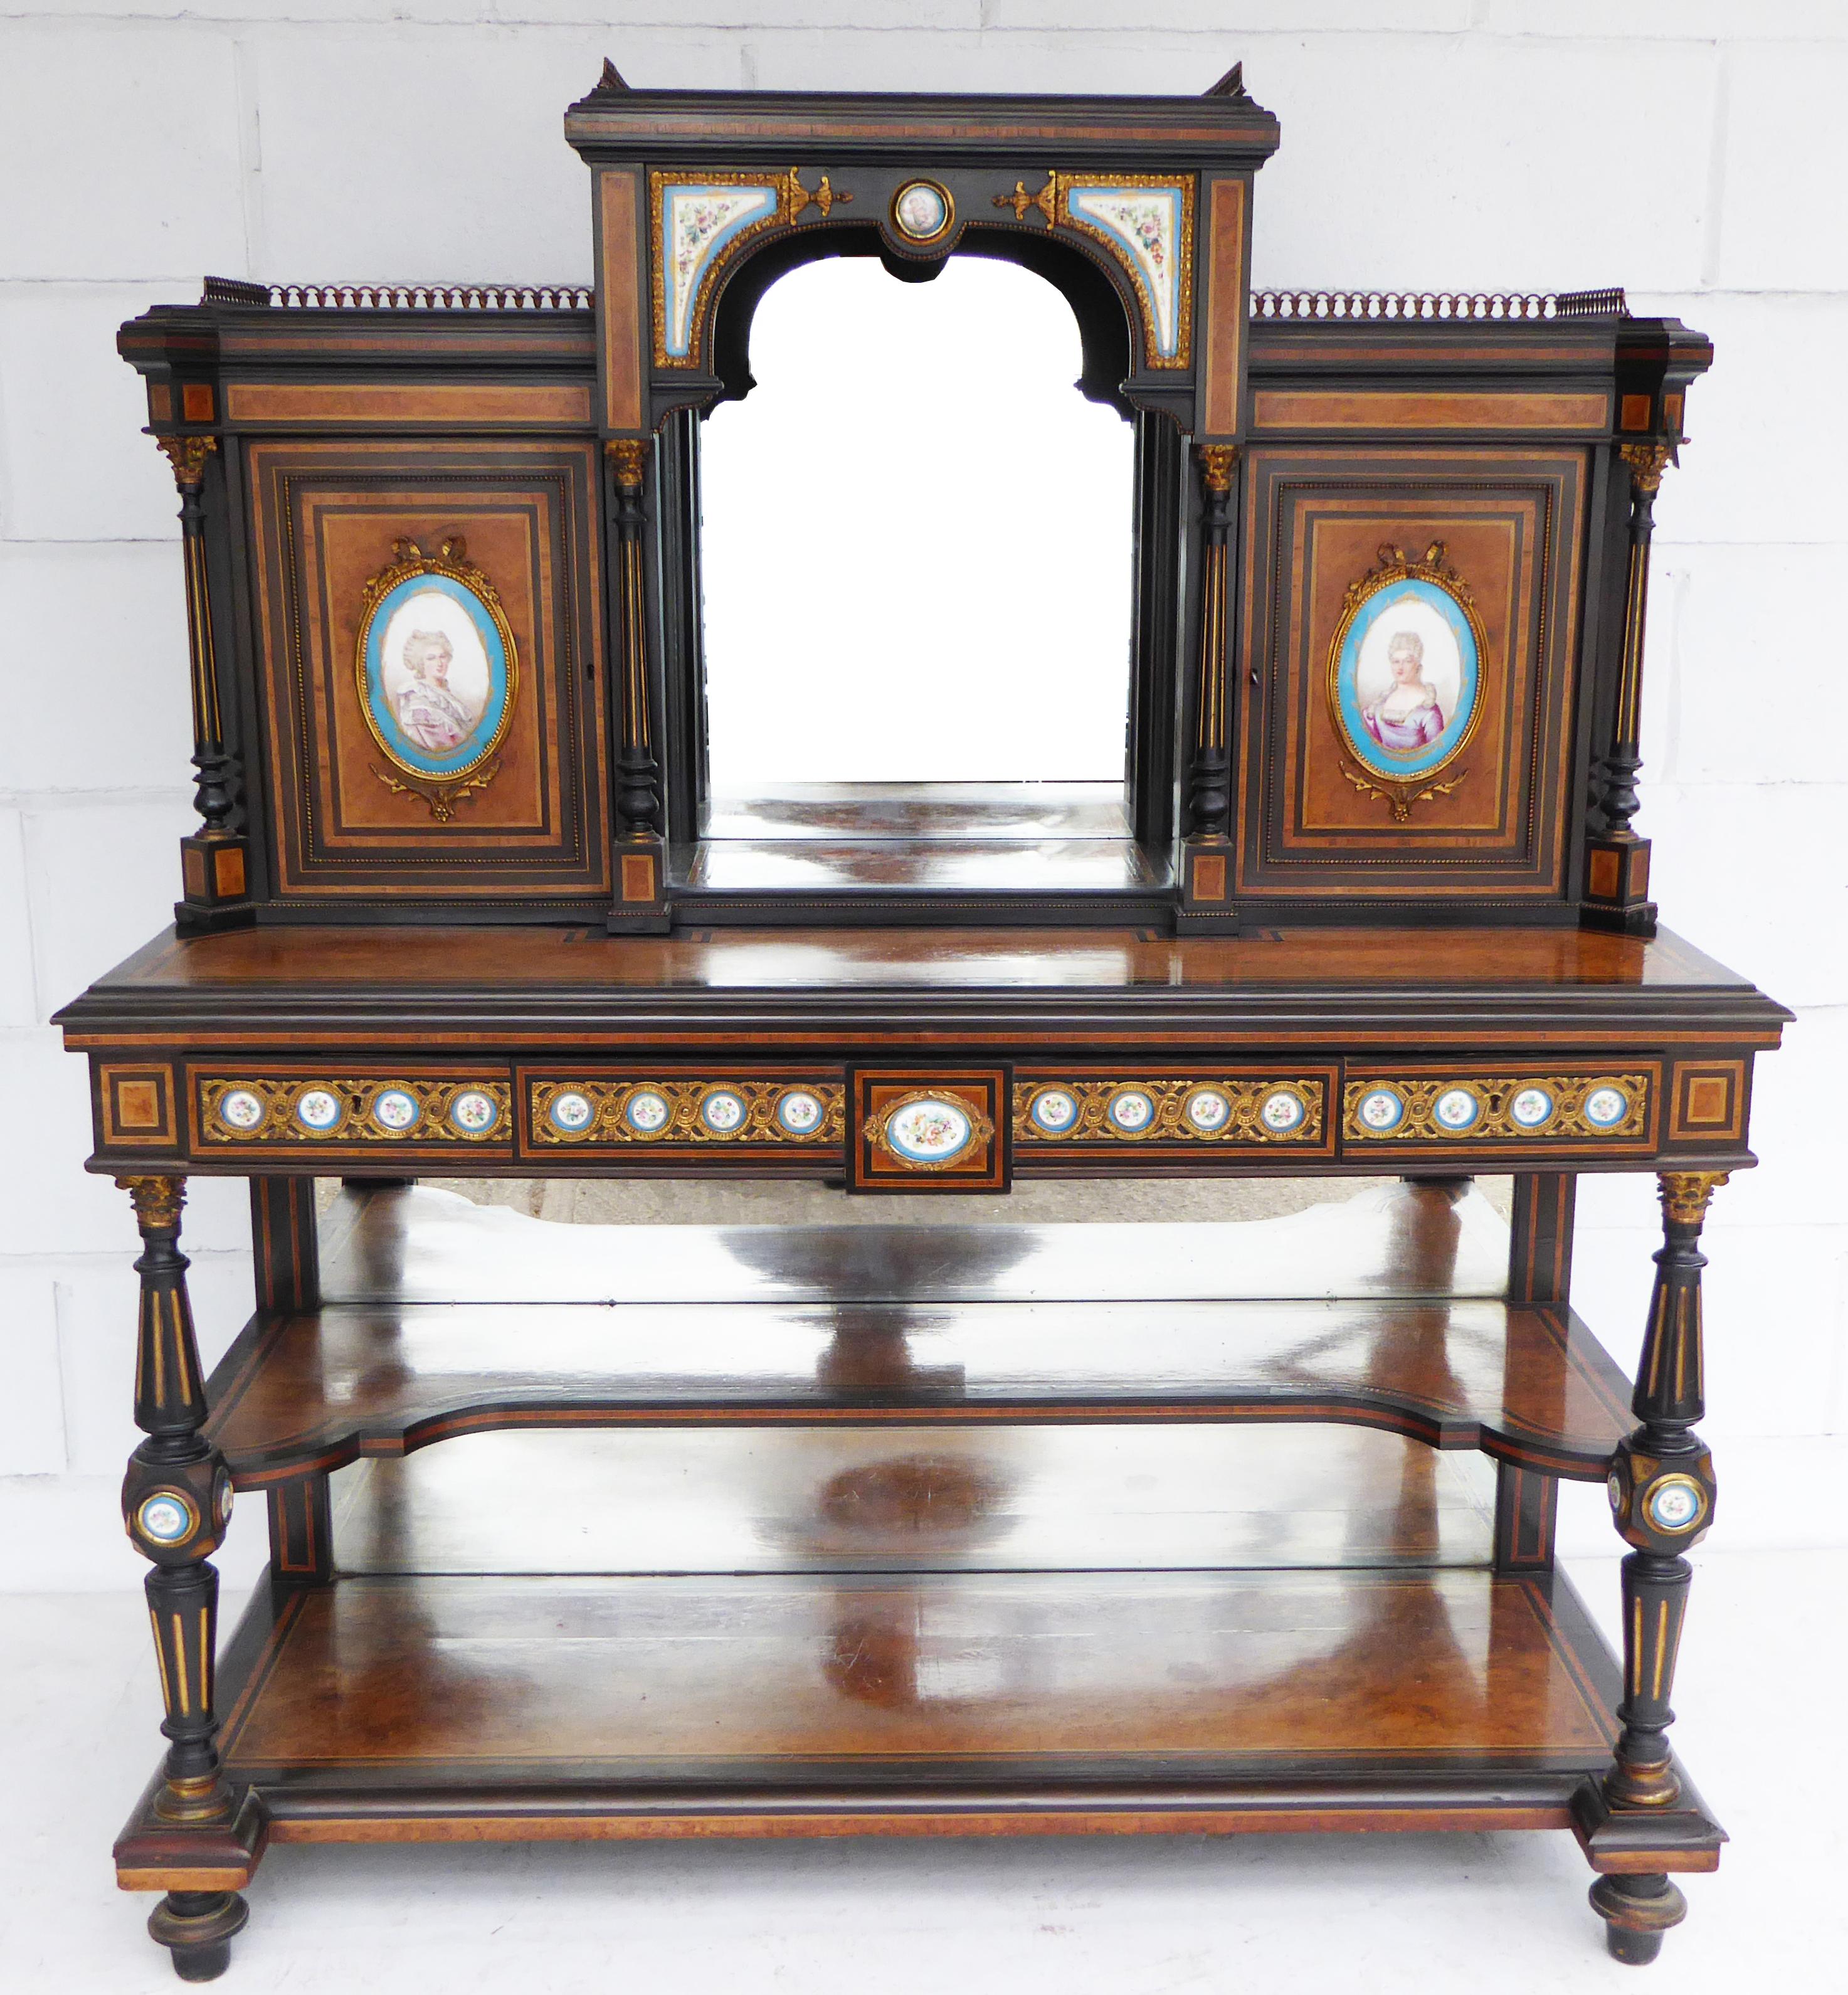 For sale is a fine quality 19th century ebony and Thuya wood Bonheur Du Jour. The bonheur du jour has a brass gallery around the top, above a central mirror, flanked by Sèvres plaques. This piece has two cupboards, each with decorative ormolu and